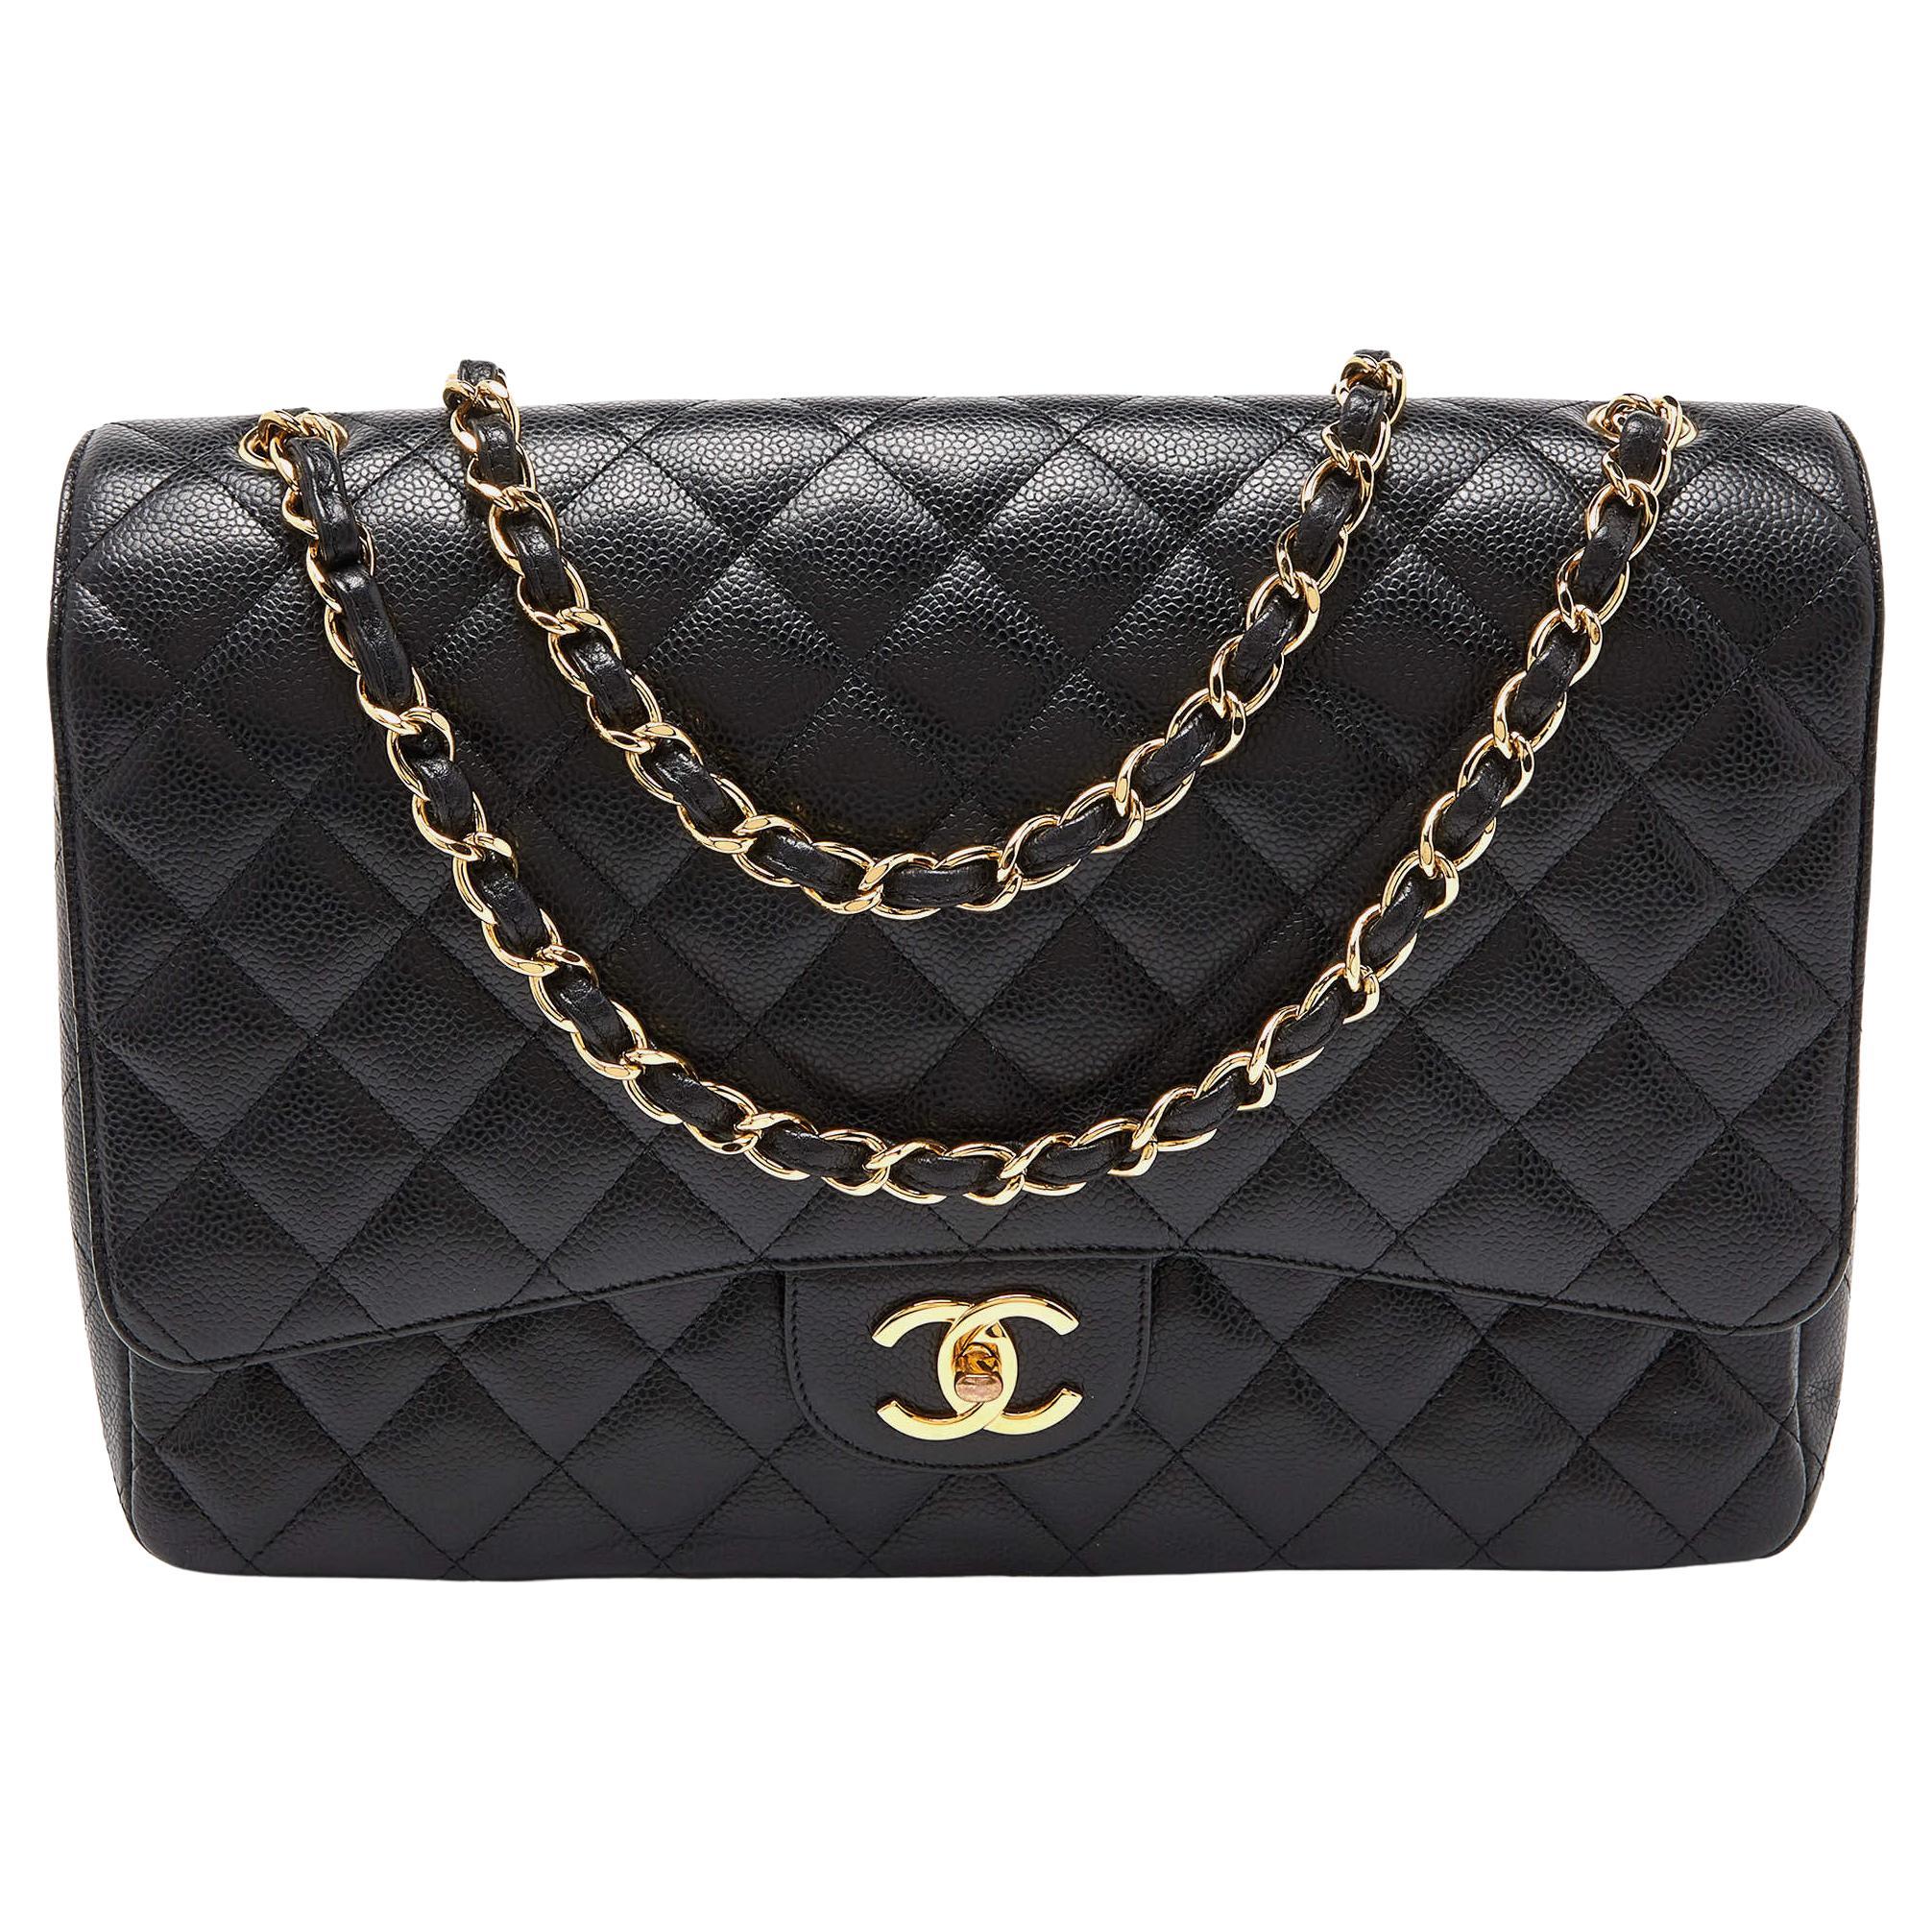 Chanel Gold Patent Leather Jumbo Classic Flap Bag